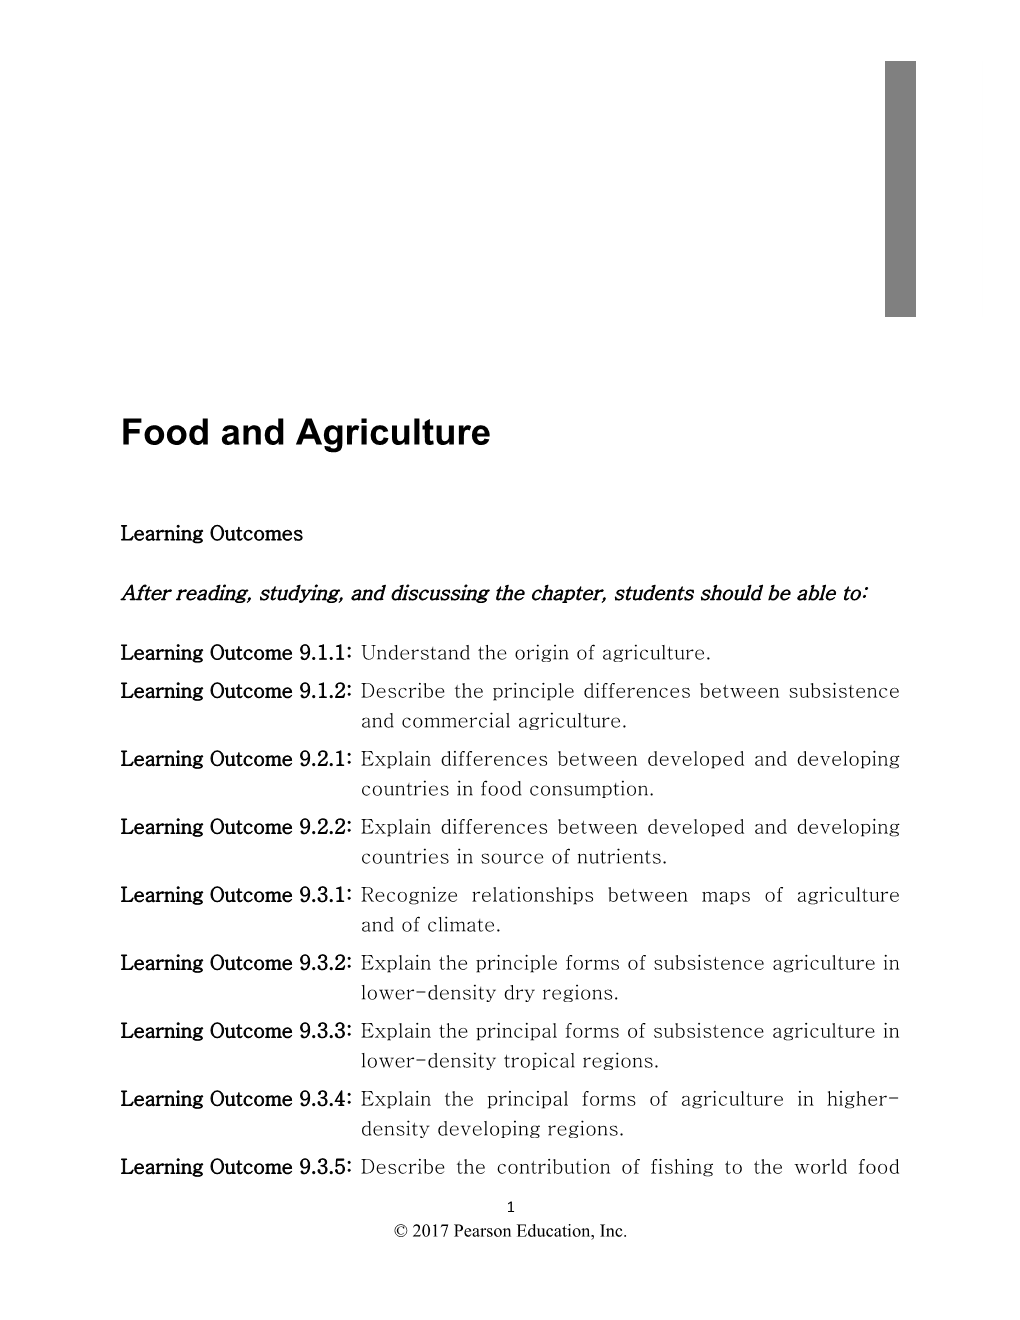 Chapter 9: Food and Agriculture